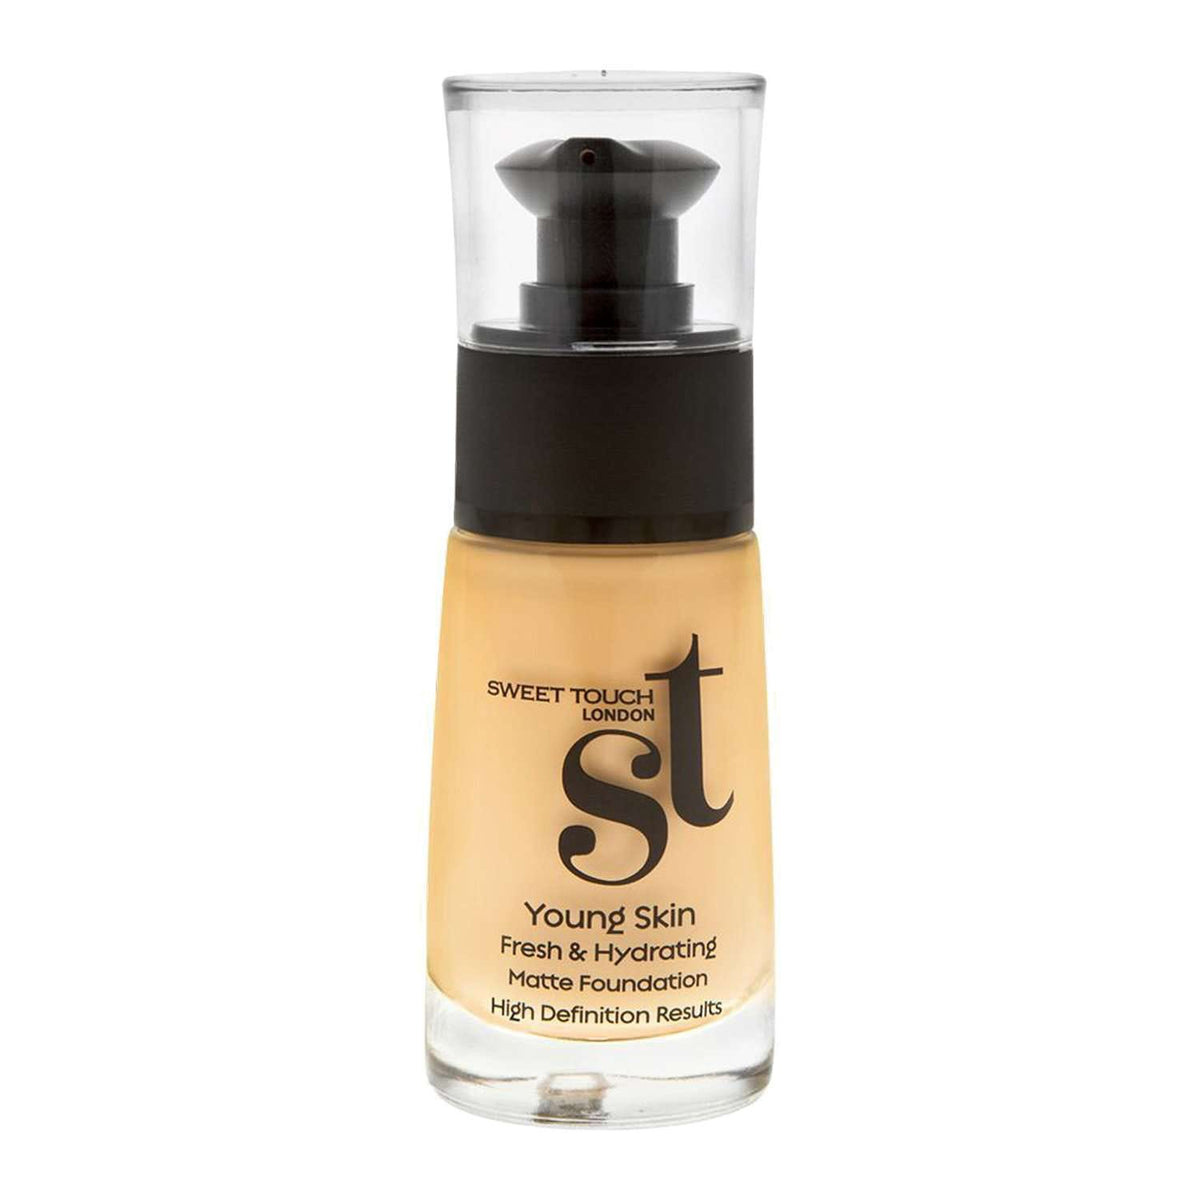 Youthfull Young Skin Foundation - YS 04